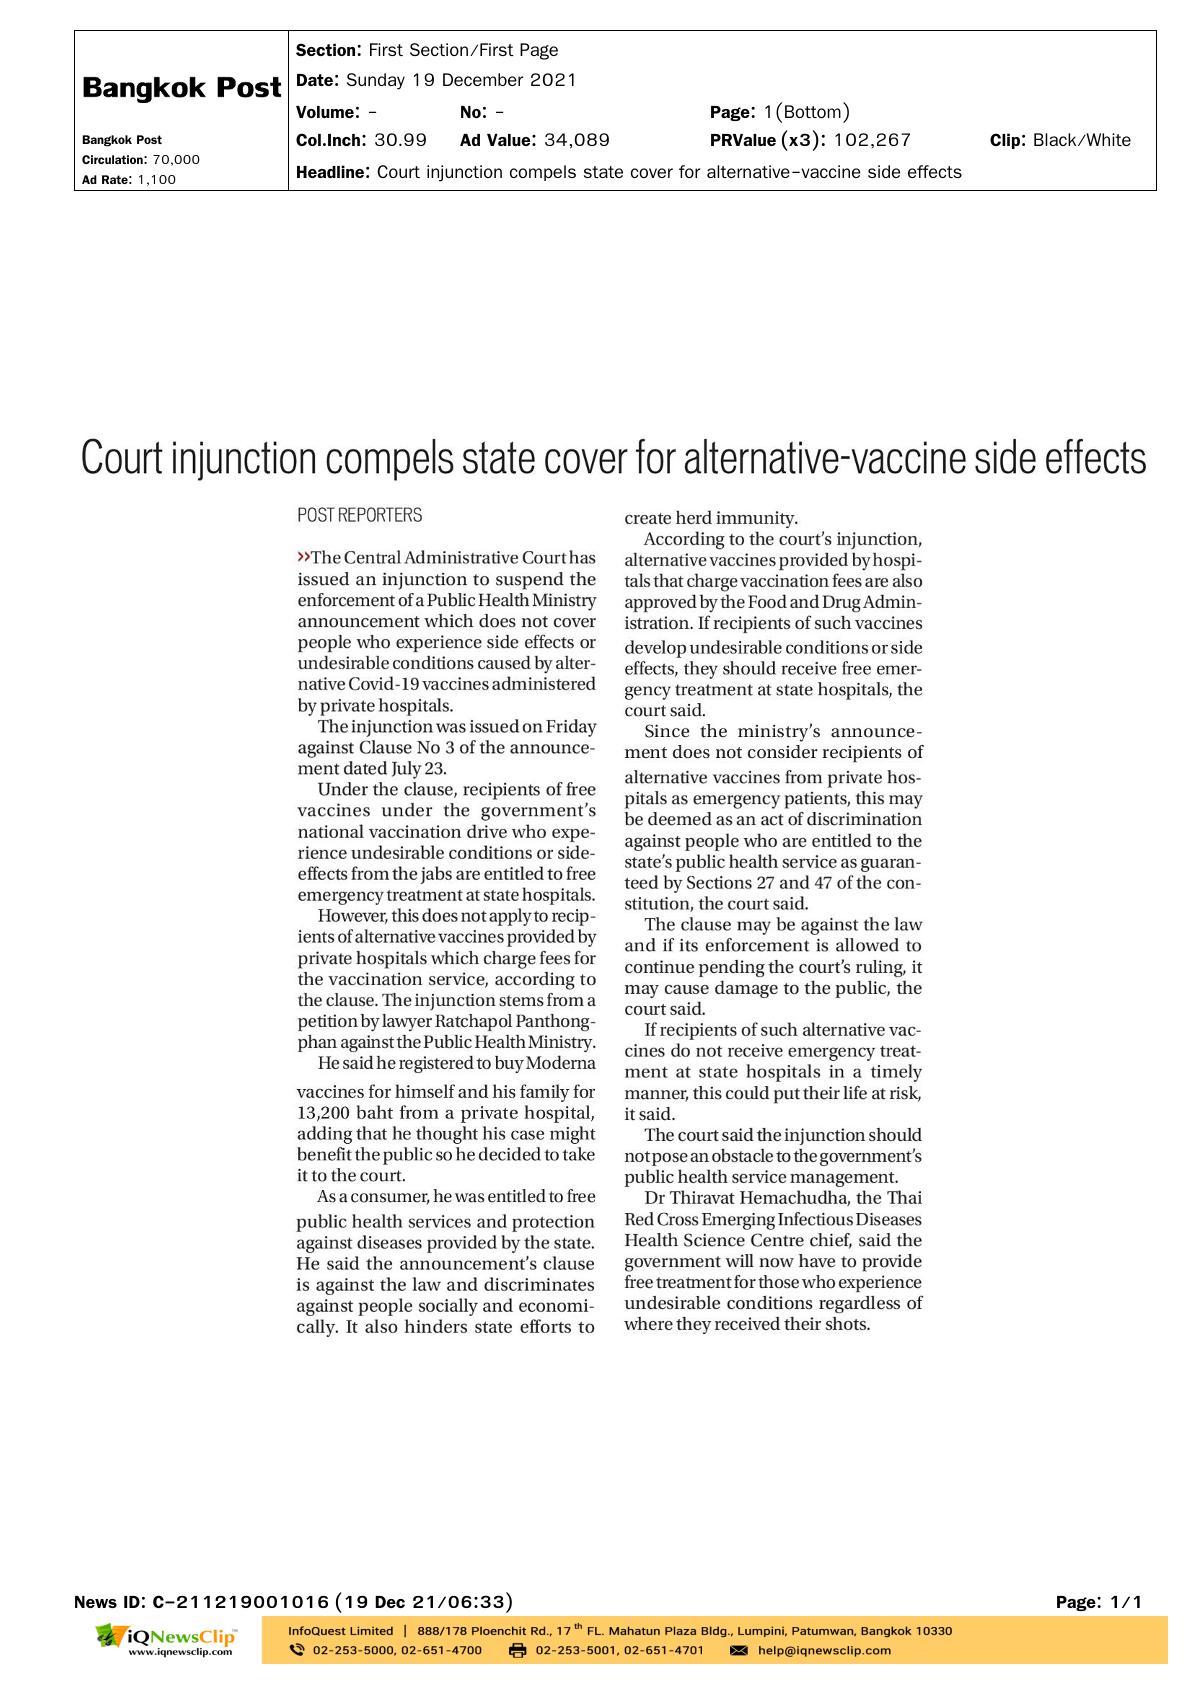 Court injunction compels state cover for alternative-vaccine side effects